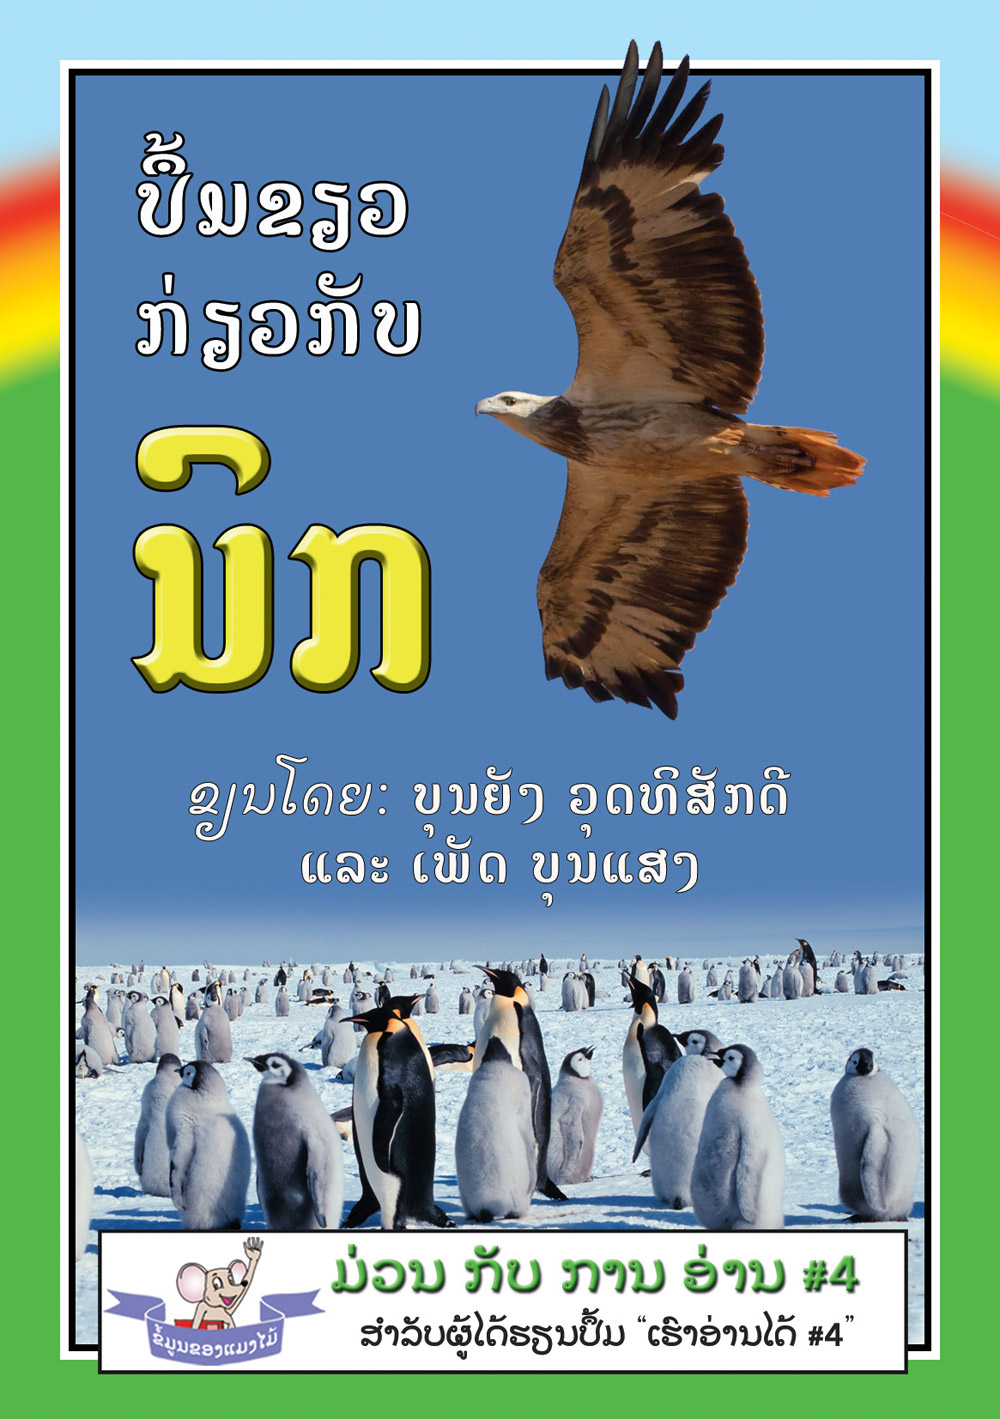 The Green Book about Birds large book cover, published in 